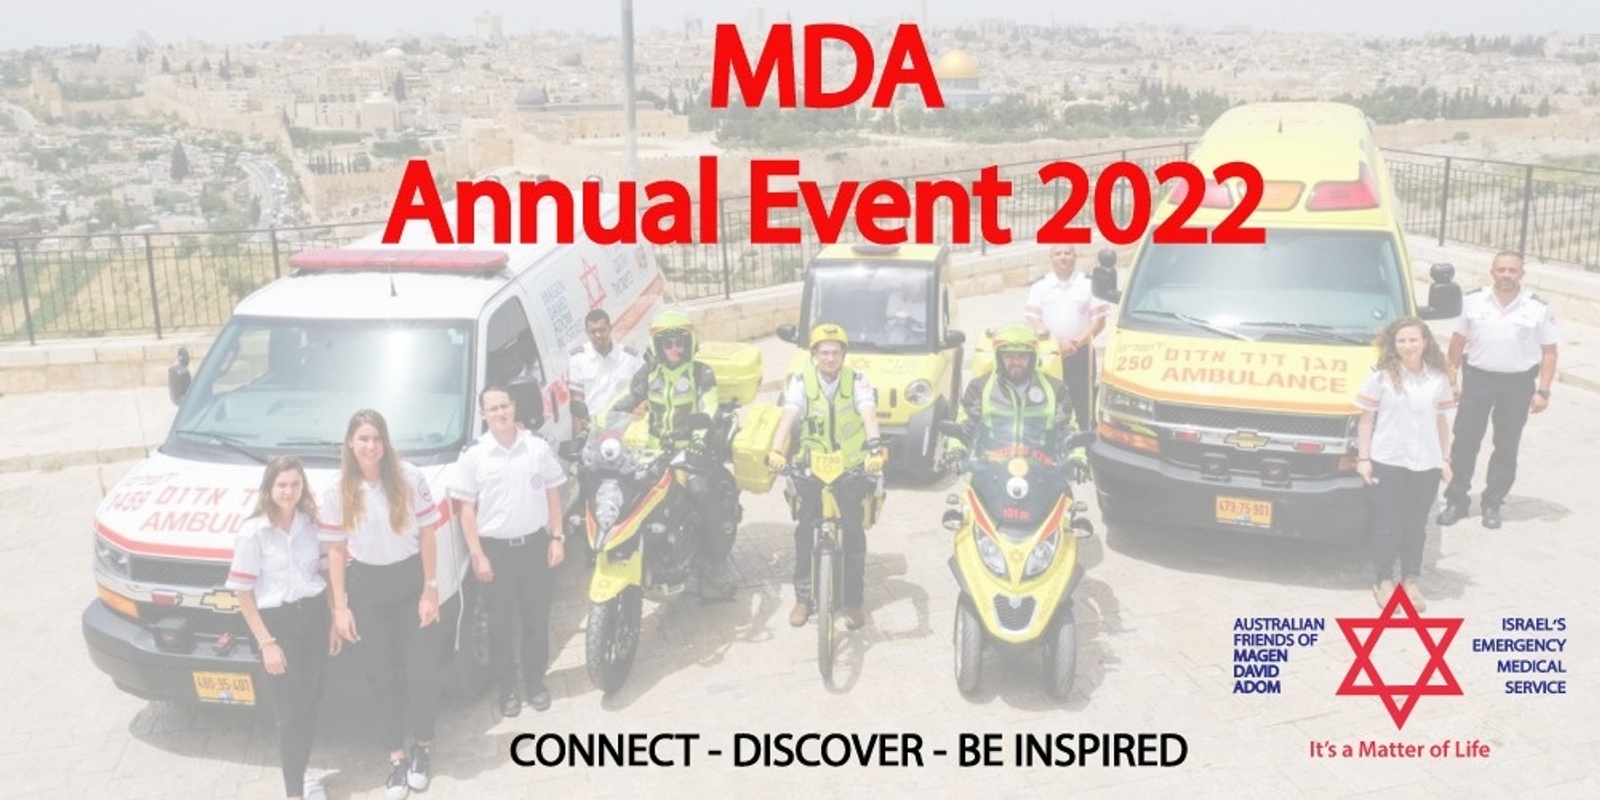 Banner image for Australian Friends of Magen David Adom Annual Event 2022 